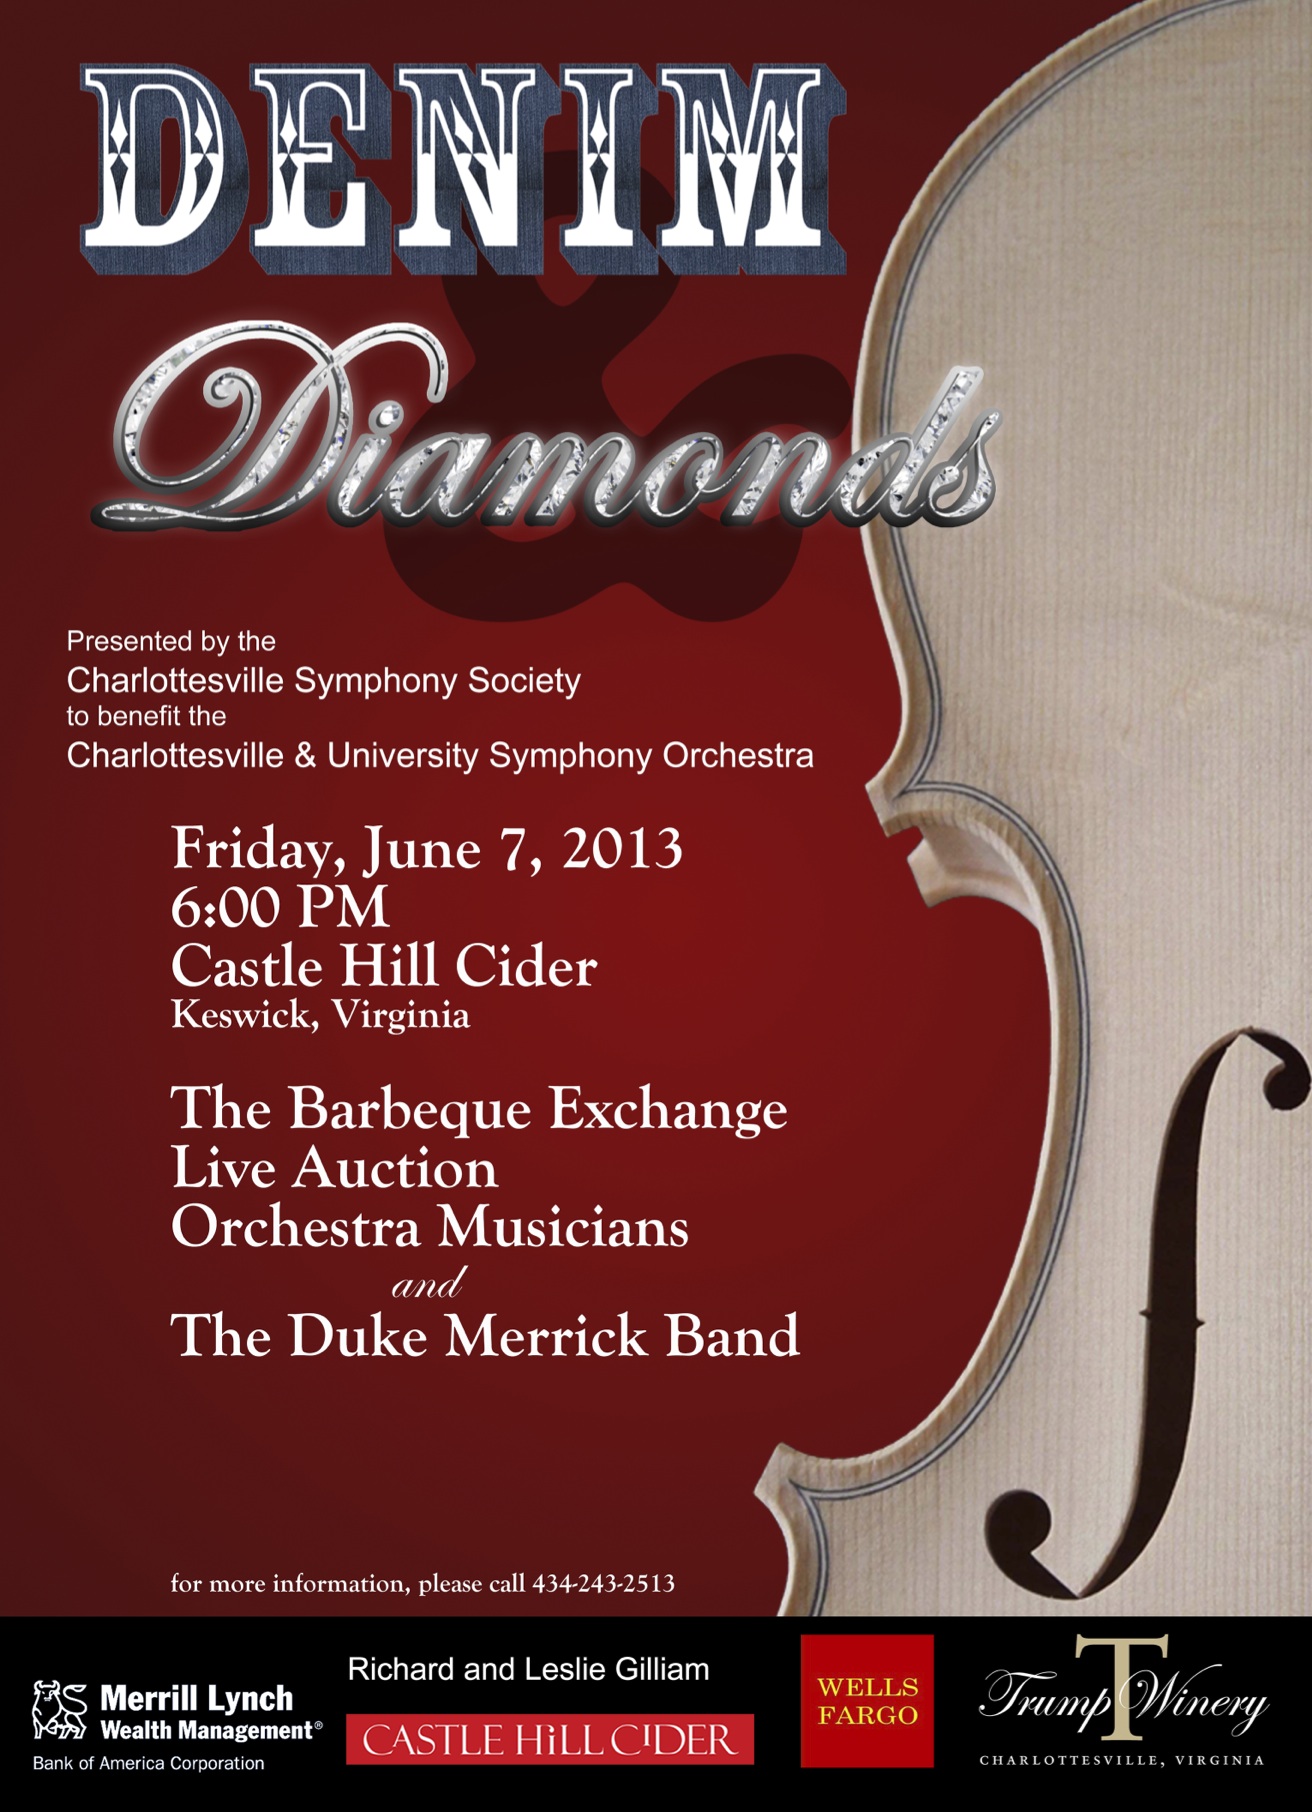 Text reads: Presented by the Charlottesville Symphony Society to benefit the Charlottesville & University Symphony Orchestra.  Friday, June 7, 2013 6:00 pm Castle Hill Cider Keswick Virginia.  The Barbeque Exchange, Live Auction, Orchestra Musicians, and the Duke Merrick Band